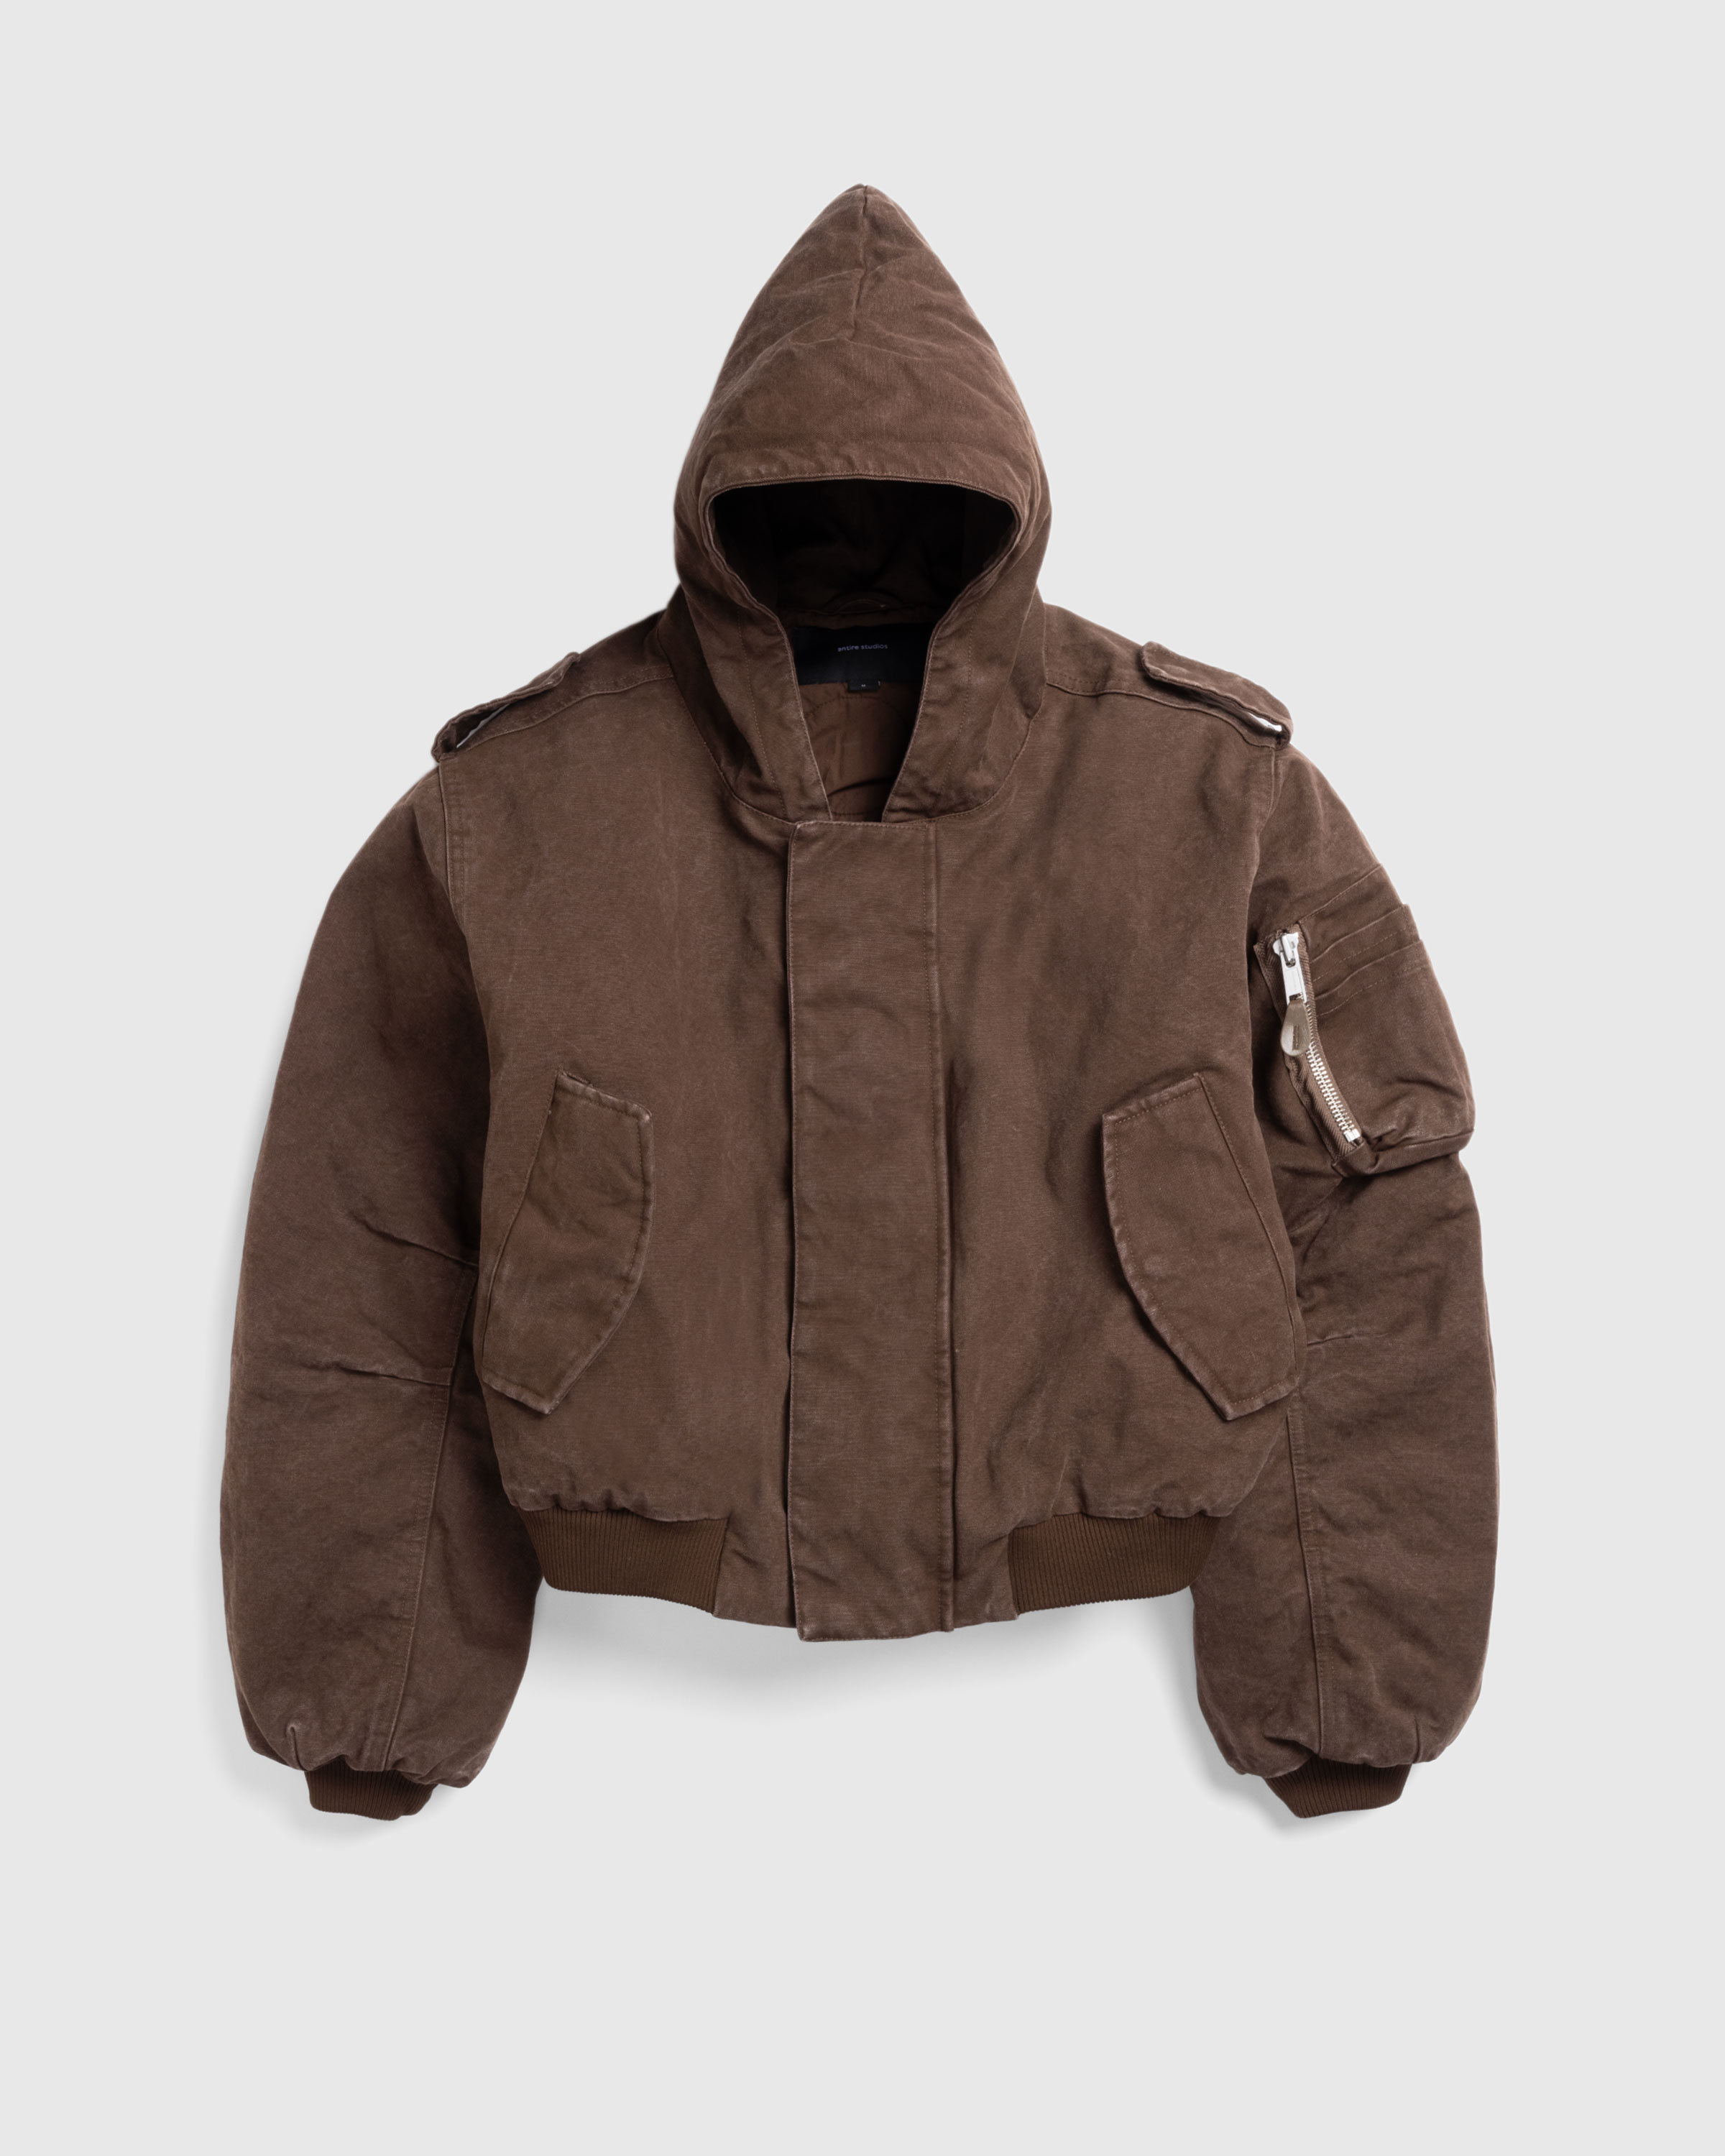 Entire Studios – W2 Bomber Military Mud - Outerwear - Brown - Image 1